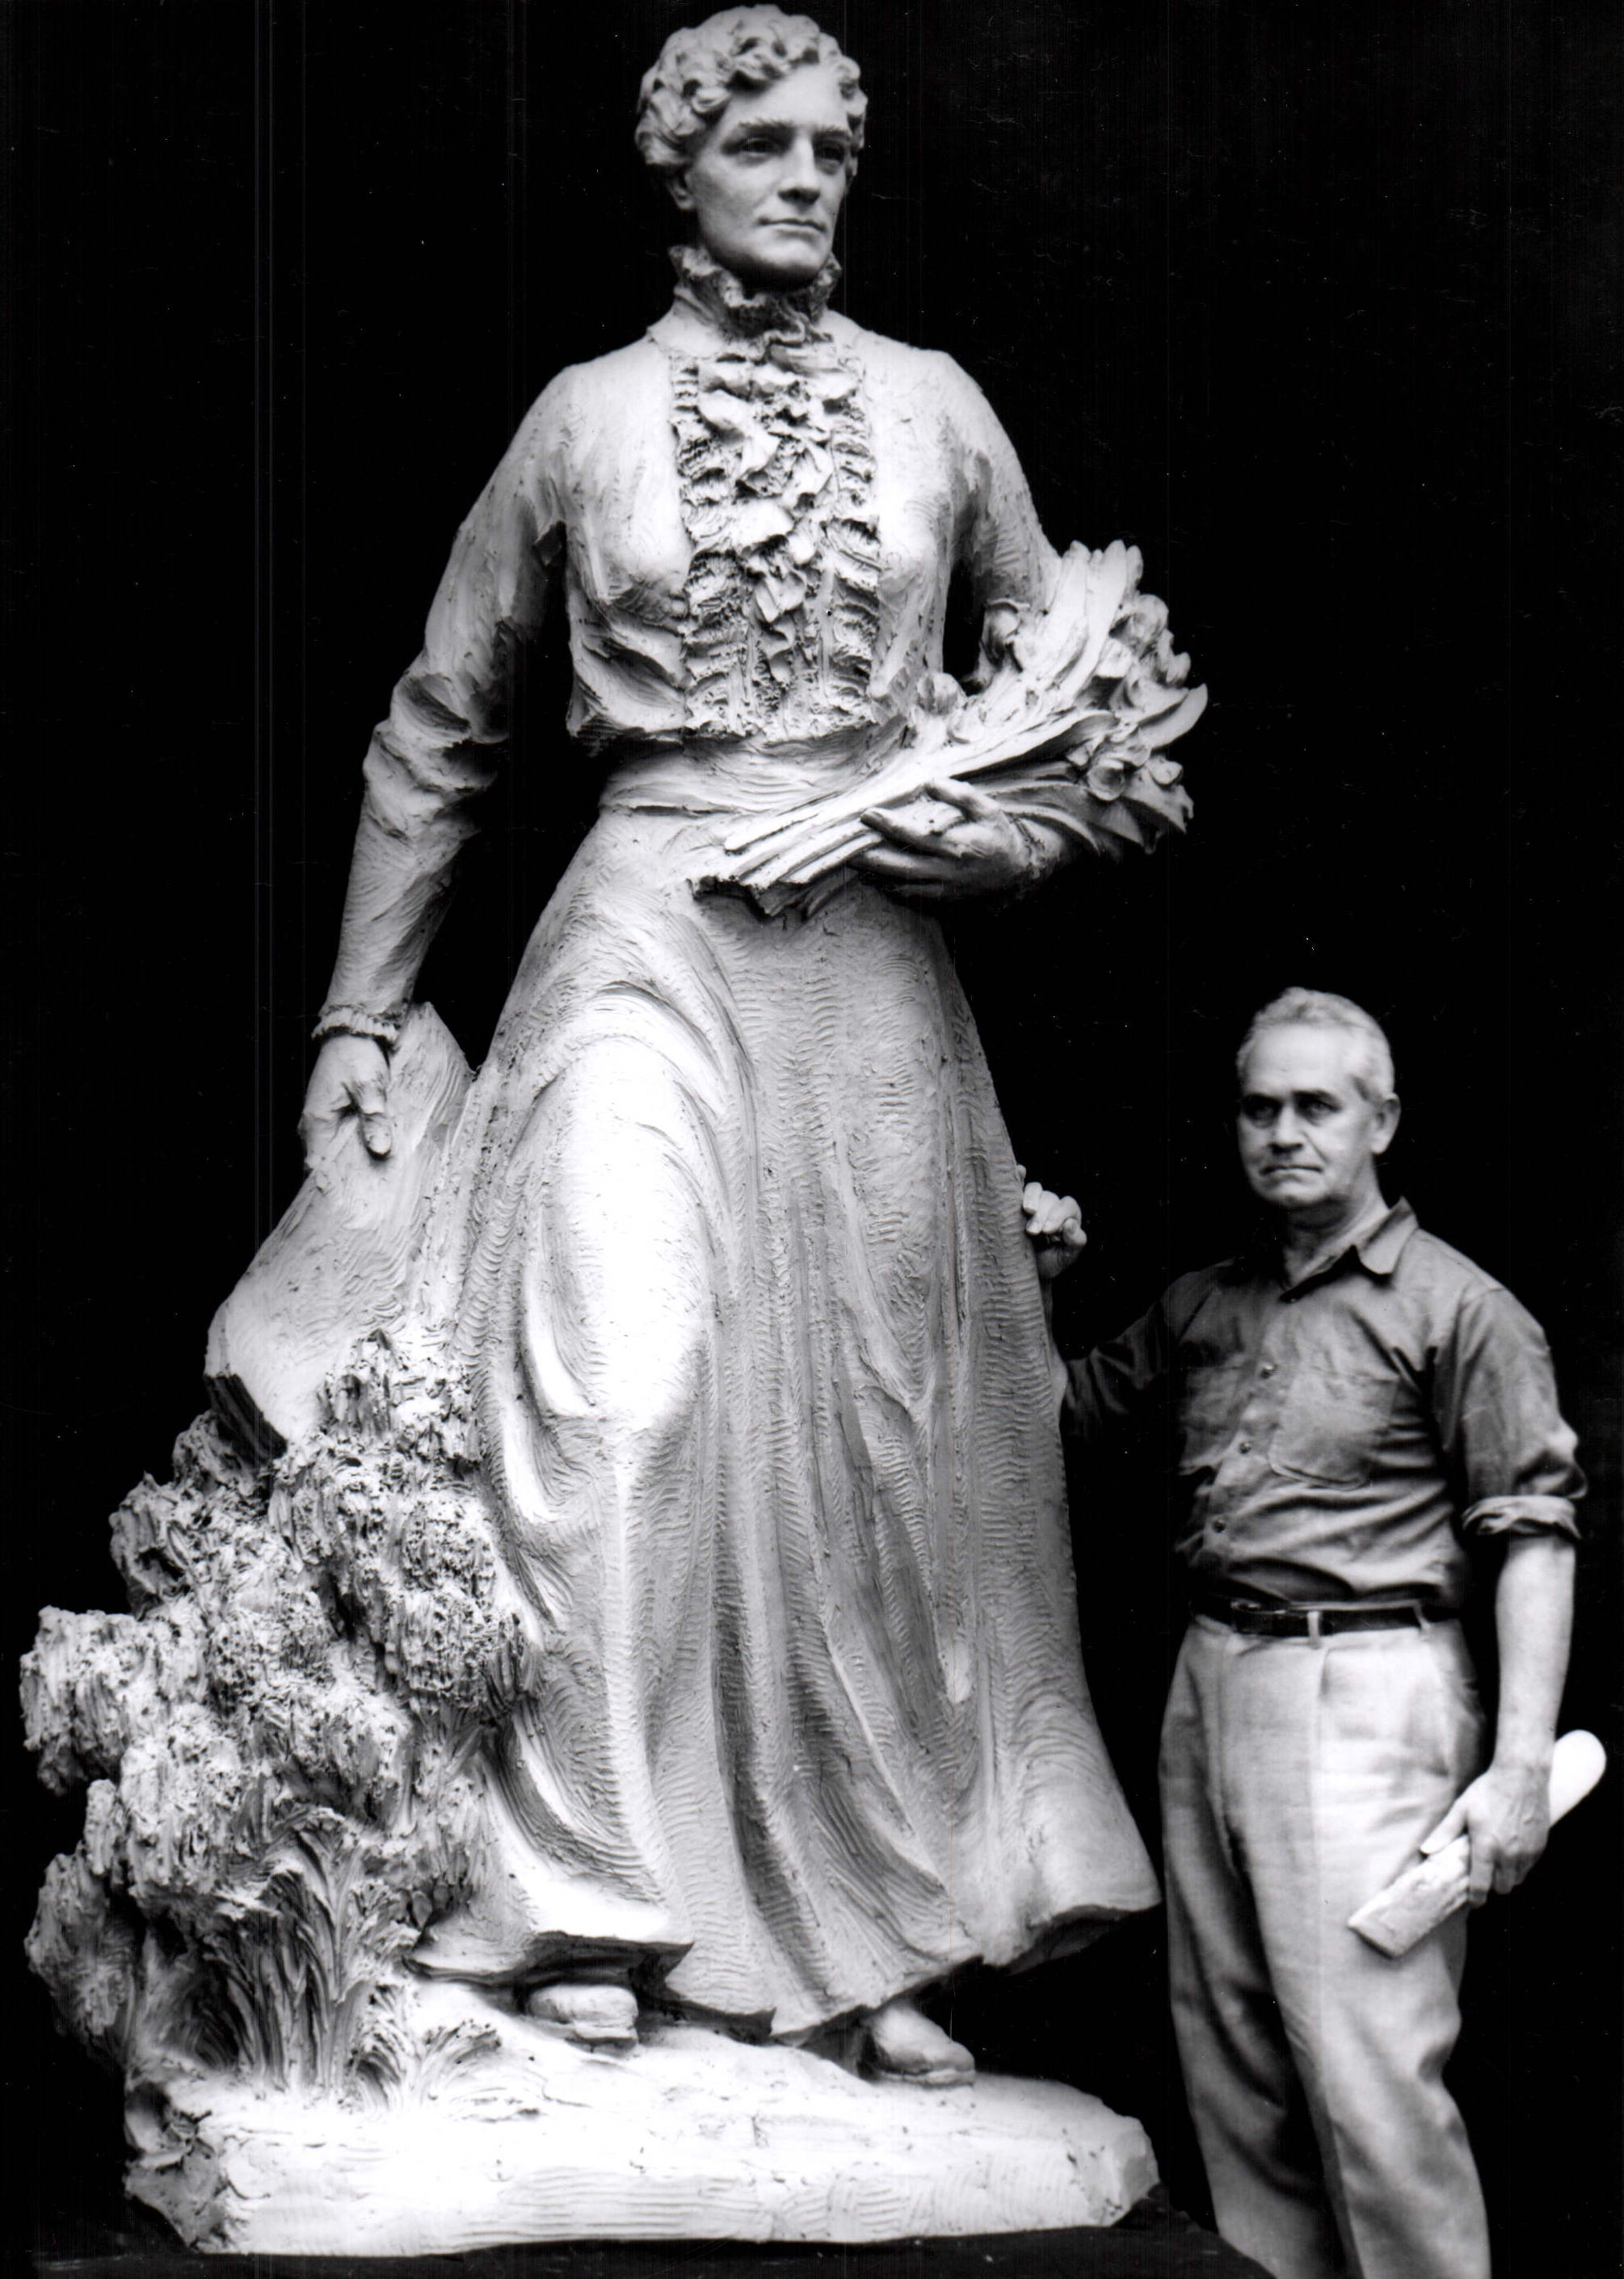 Esther Hobart Morris, The Statue and Her Creator